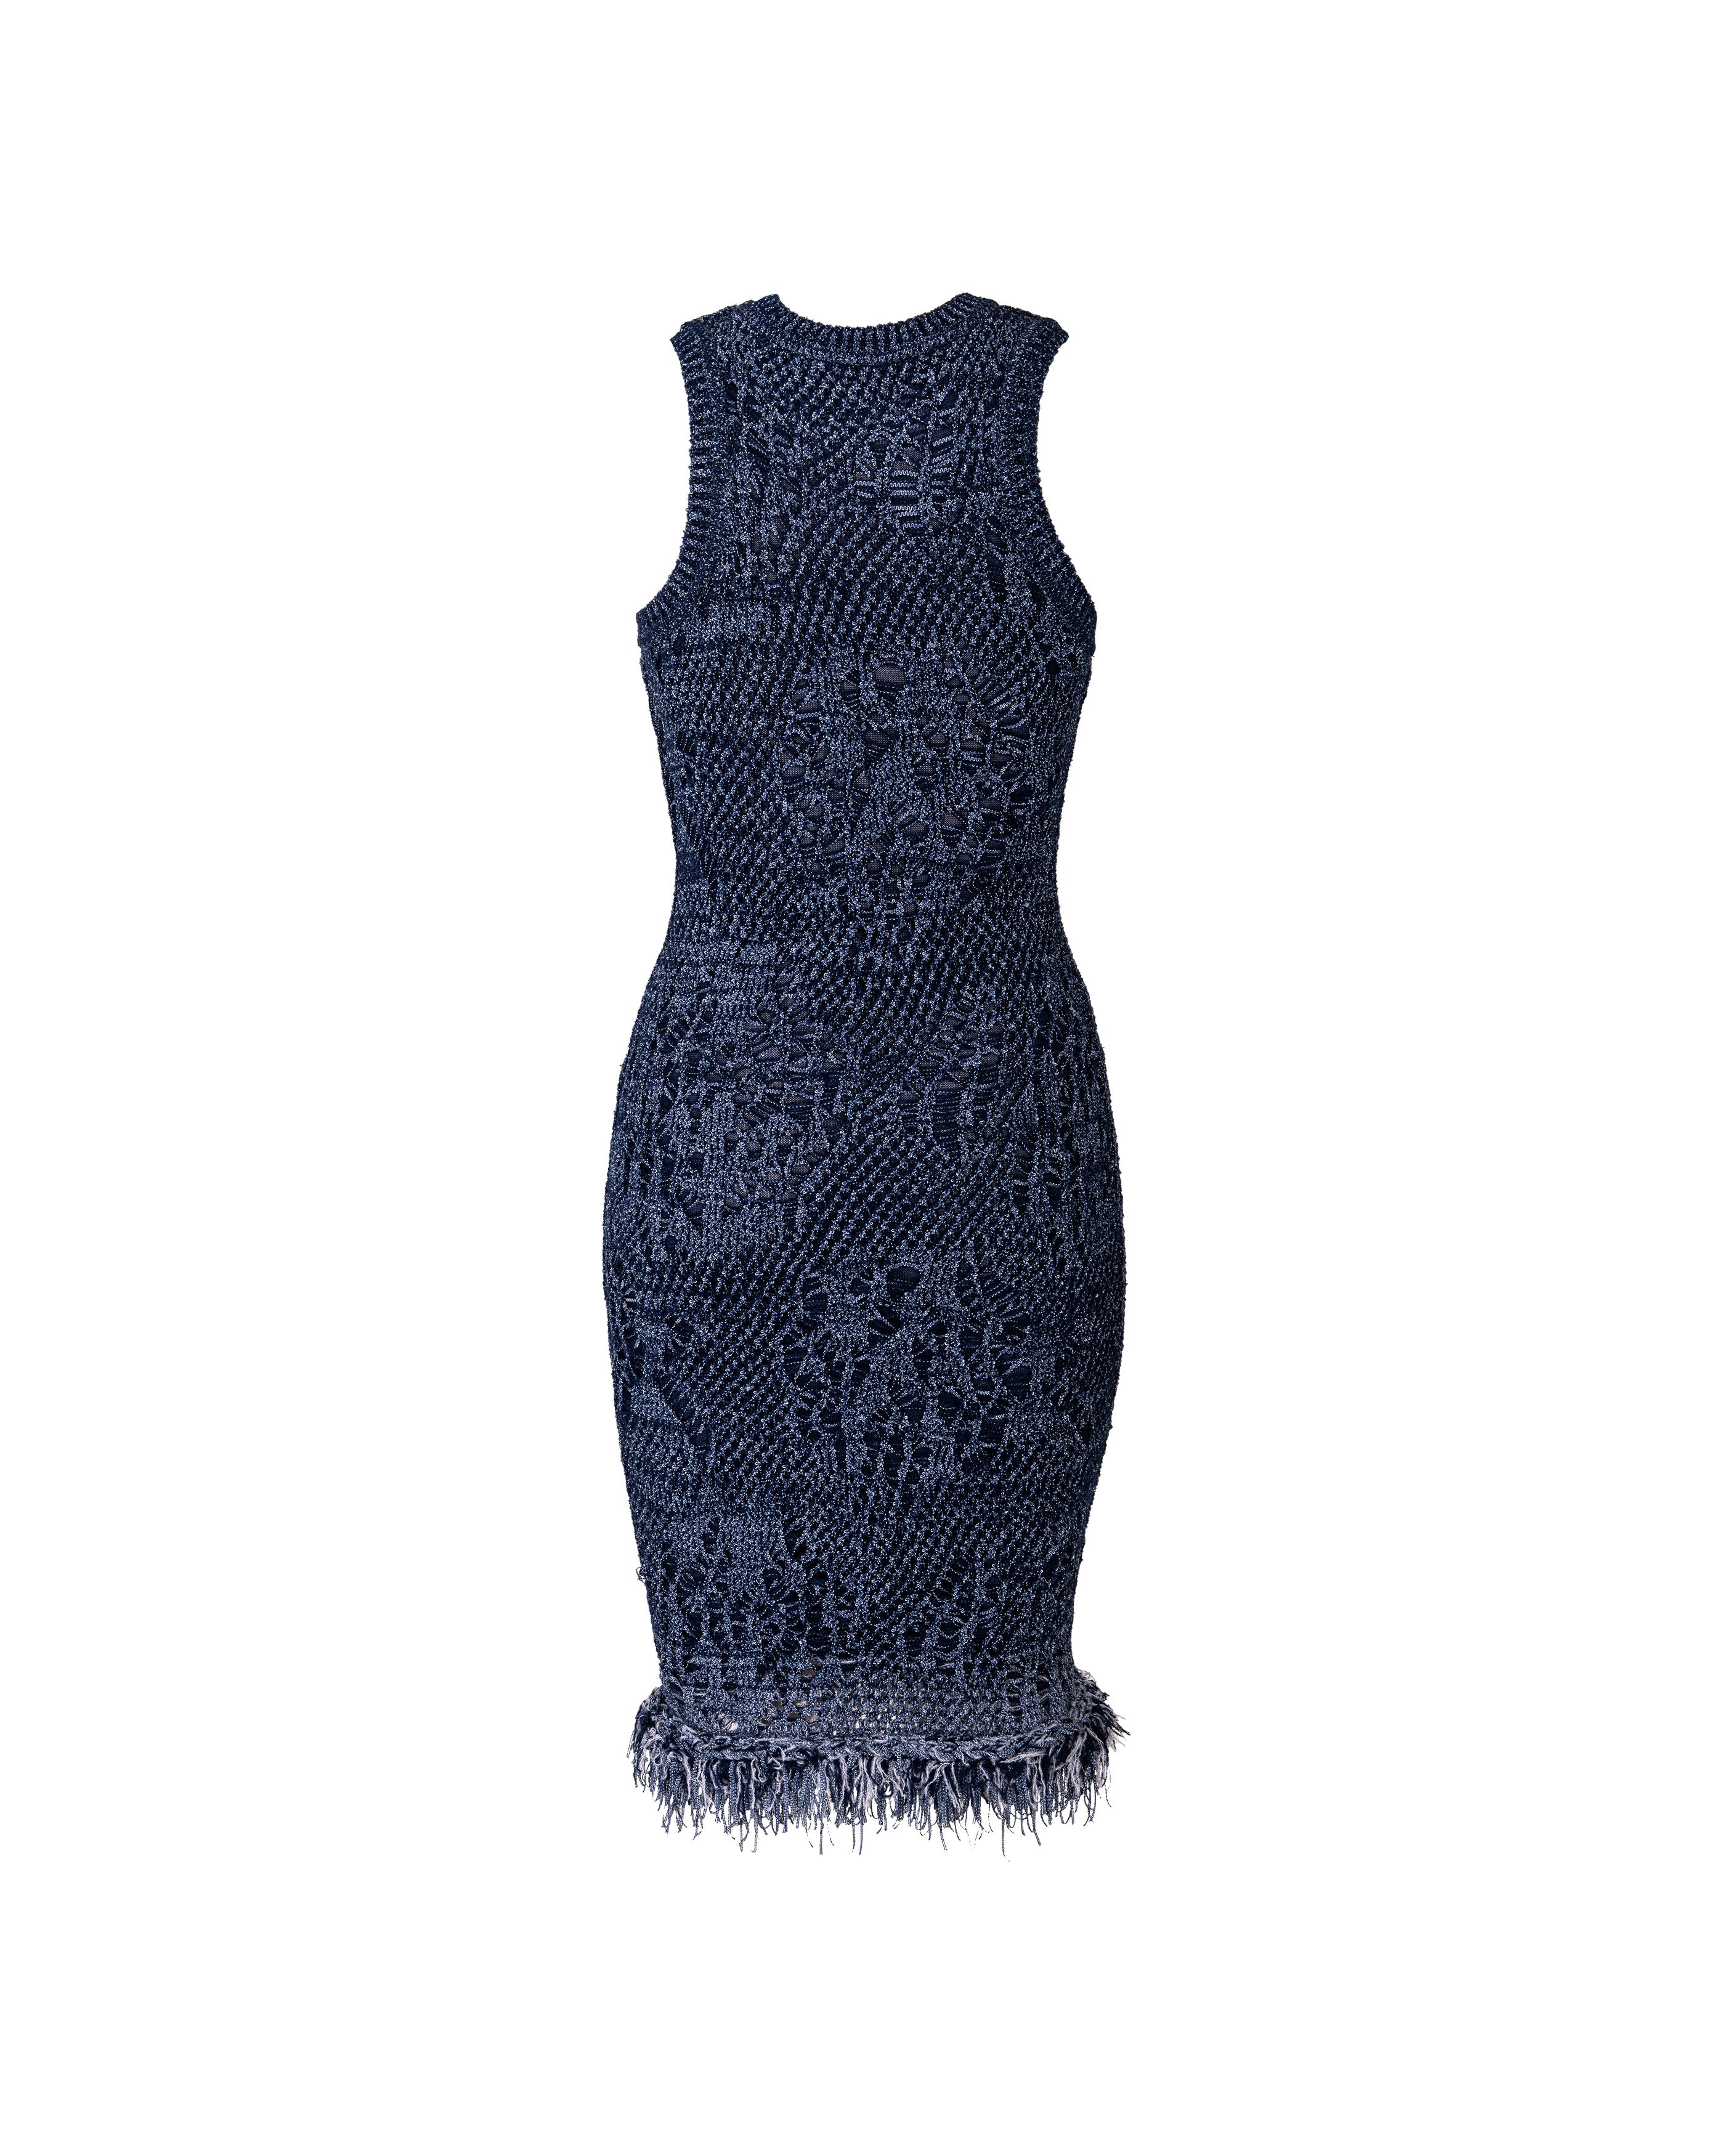 S/S 2000 Christian Dior by Galliano Deep Blue Knit Dress with Faux Feather Trim In Excellent Condition In North Hollywood, CA